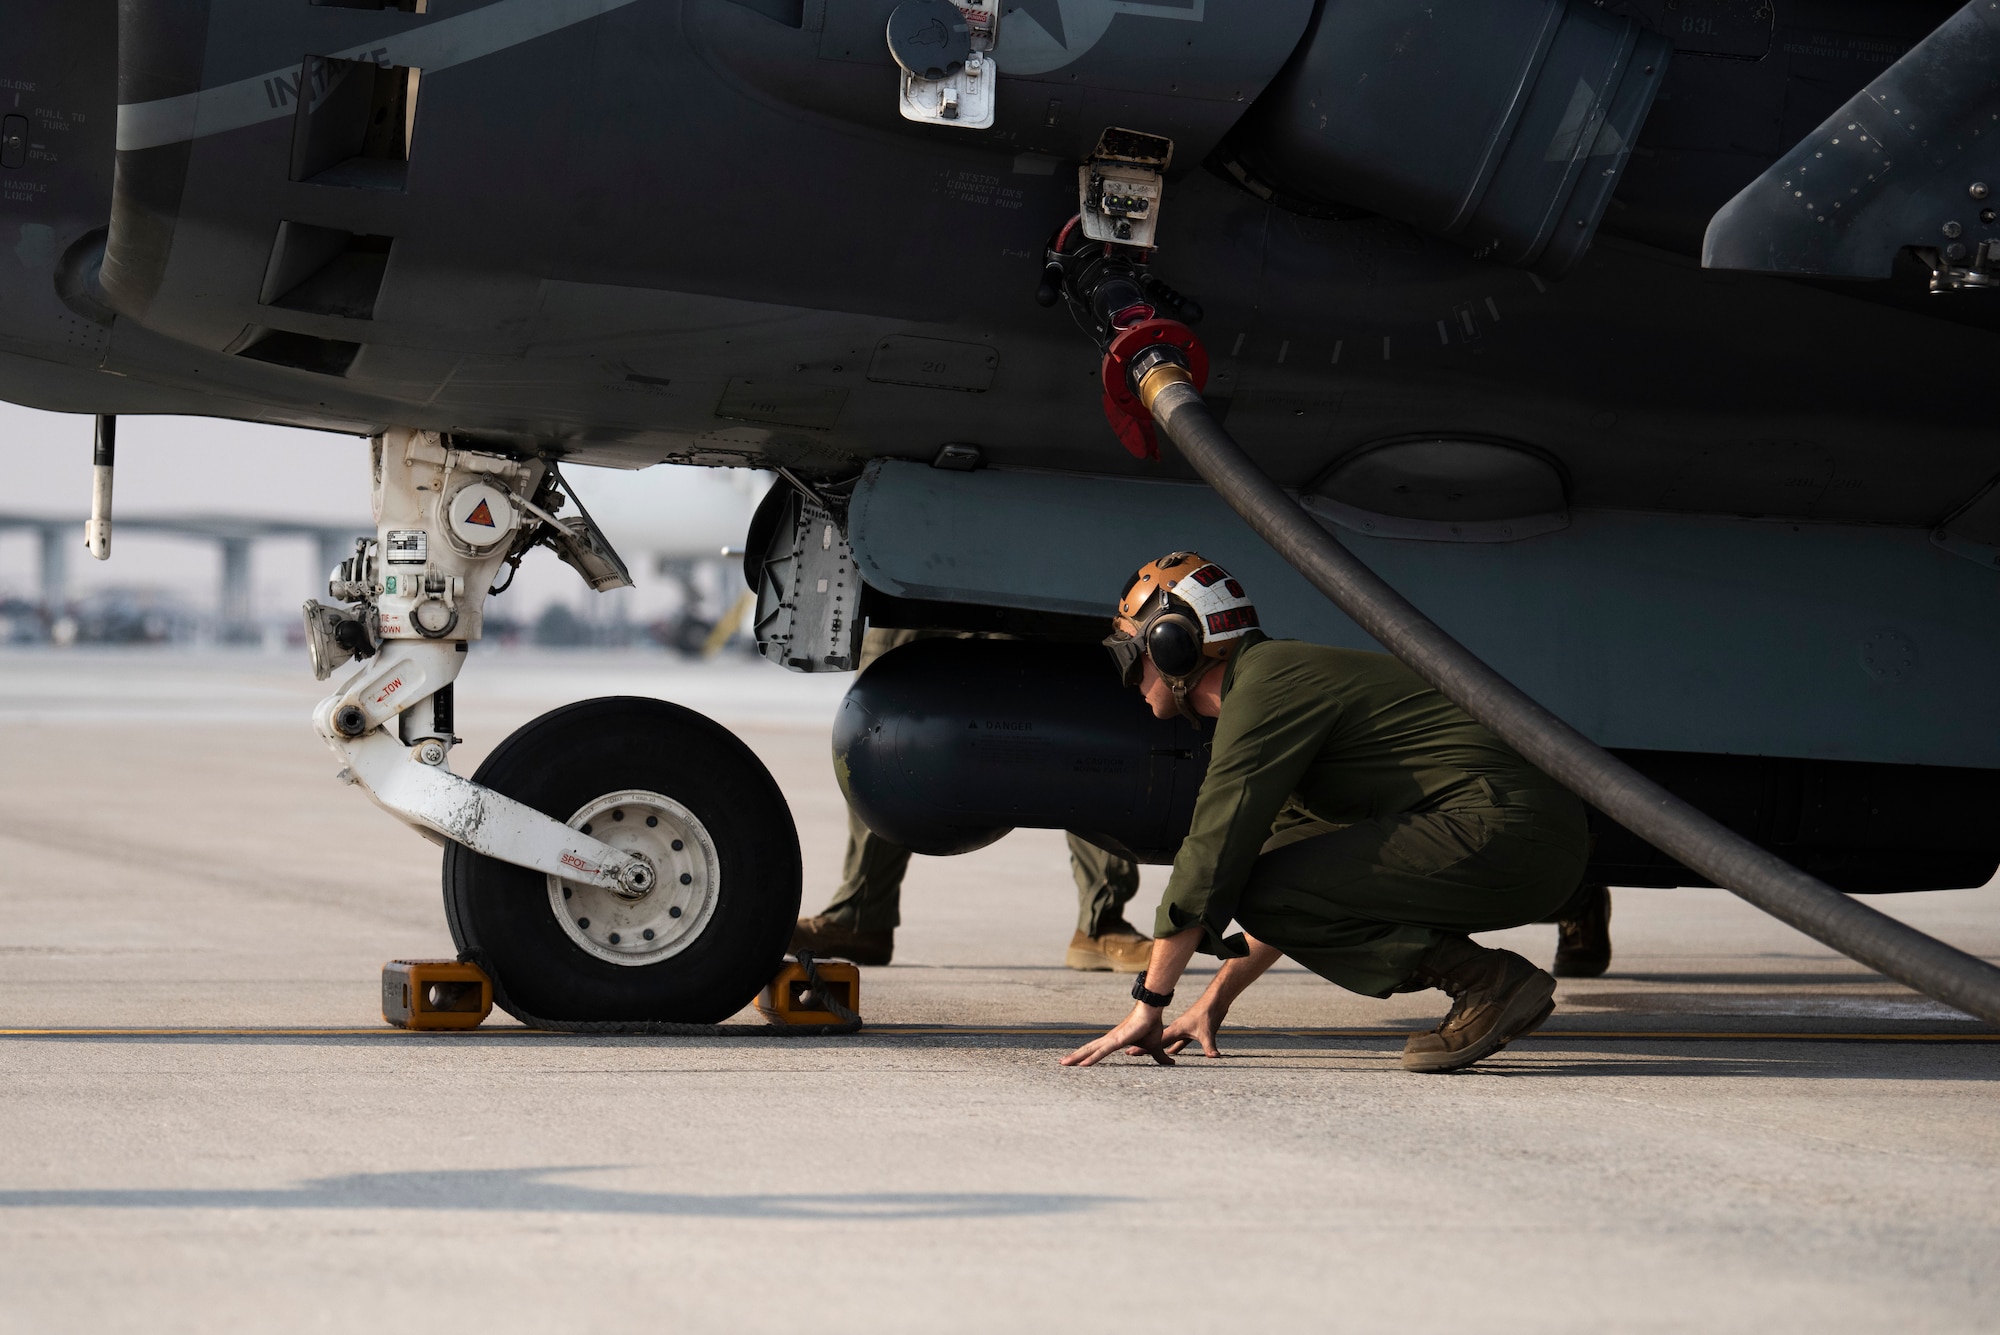 A U.S. Marine with Marine Attack Squadron 542, inspects a chock on an AV-8B II Harrier, at Mountain Home Air Force Base, Idaho, Oct. 8, 2020. VMA 542 and Marine Wing Support Squadron 271 worked closely with 366th Logistics Readiness Squadron fuels flight and provided aviation fuel, heavy equipment and utilities support for exercise Mountain Tiger. (U.S Air Force photo by Airman 1st Class Natalie Rubenak)